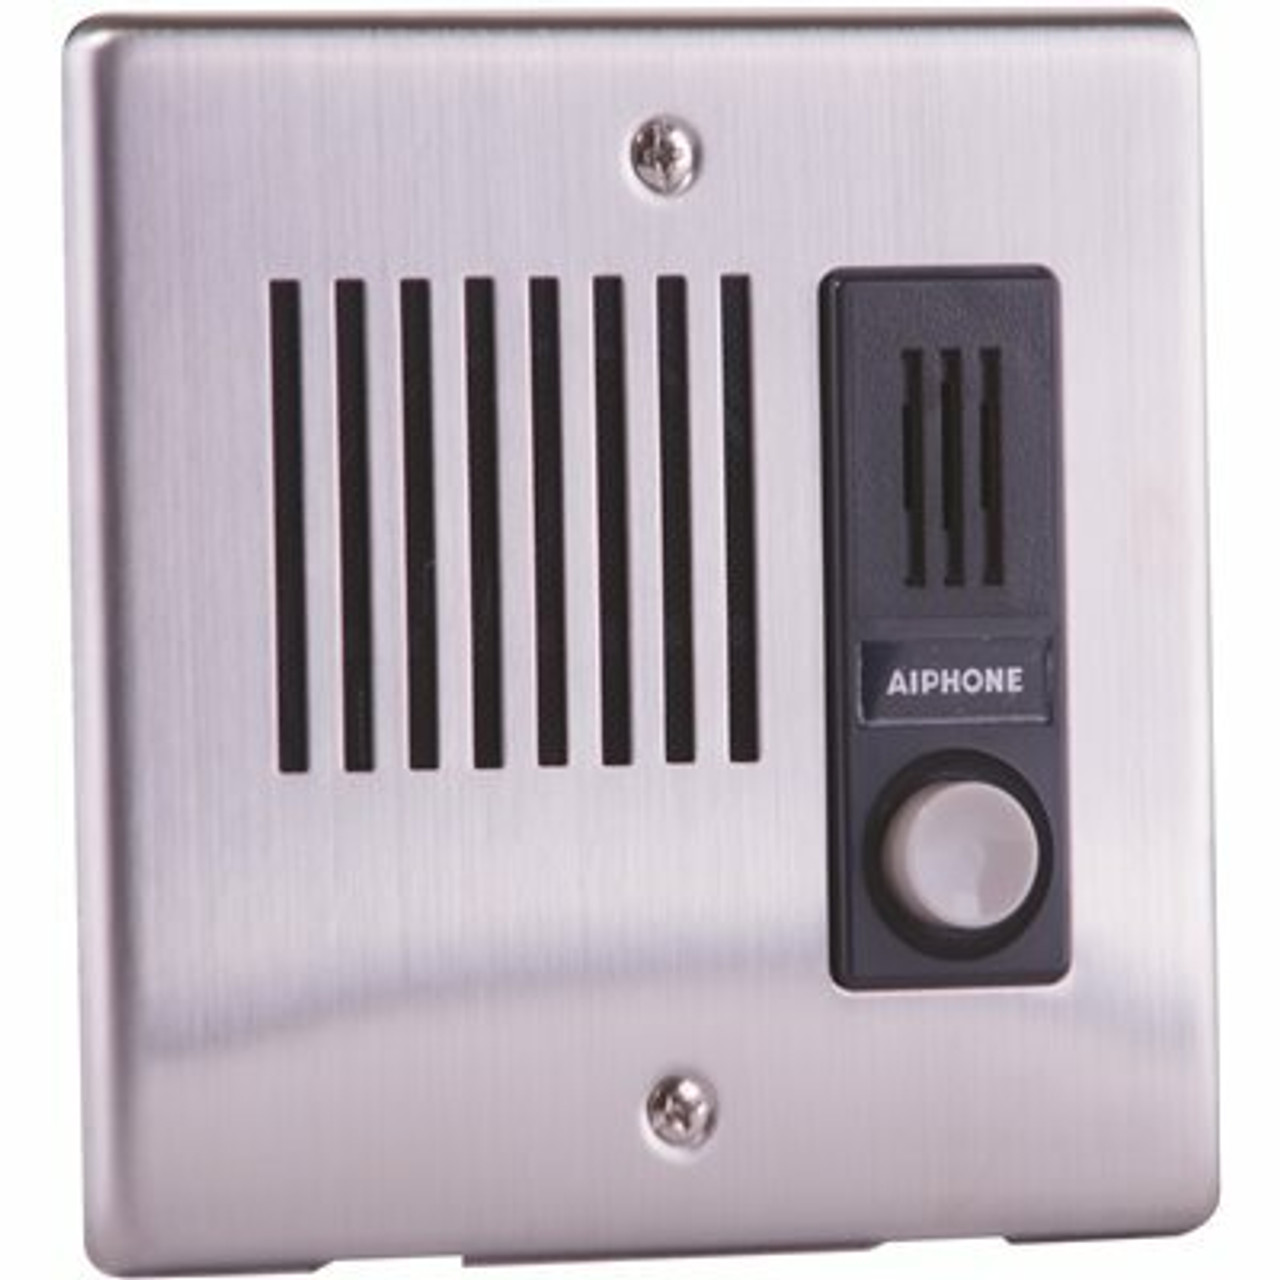 Aiphone Le Series Surface Mount 1-Channel Door Station Intercom With Weather Resistant, Stainless Steel